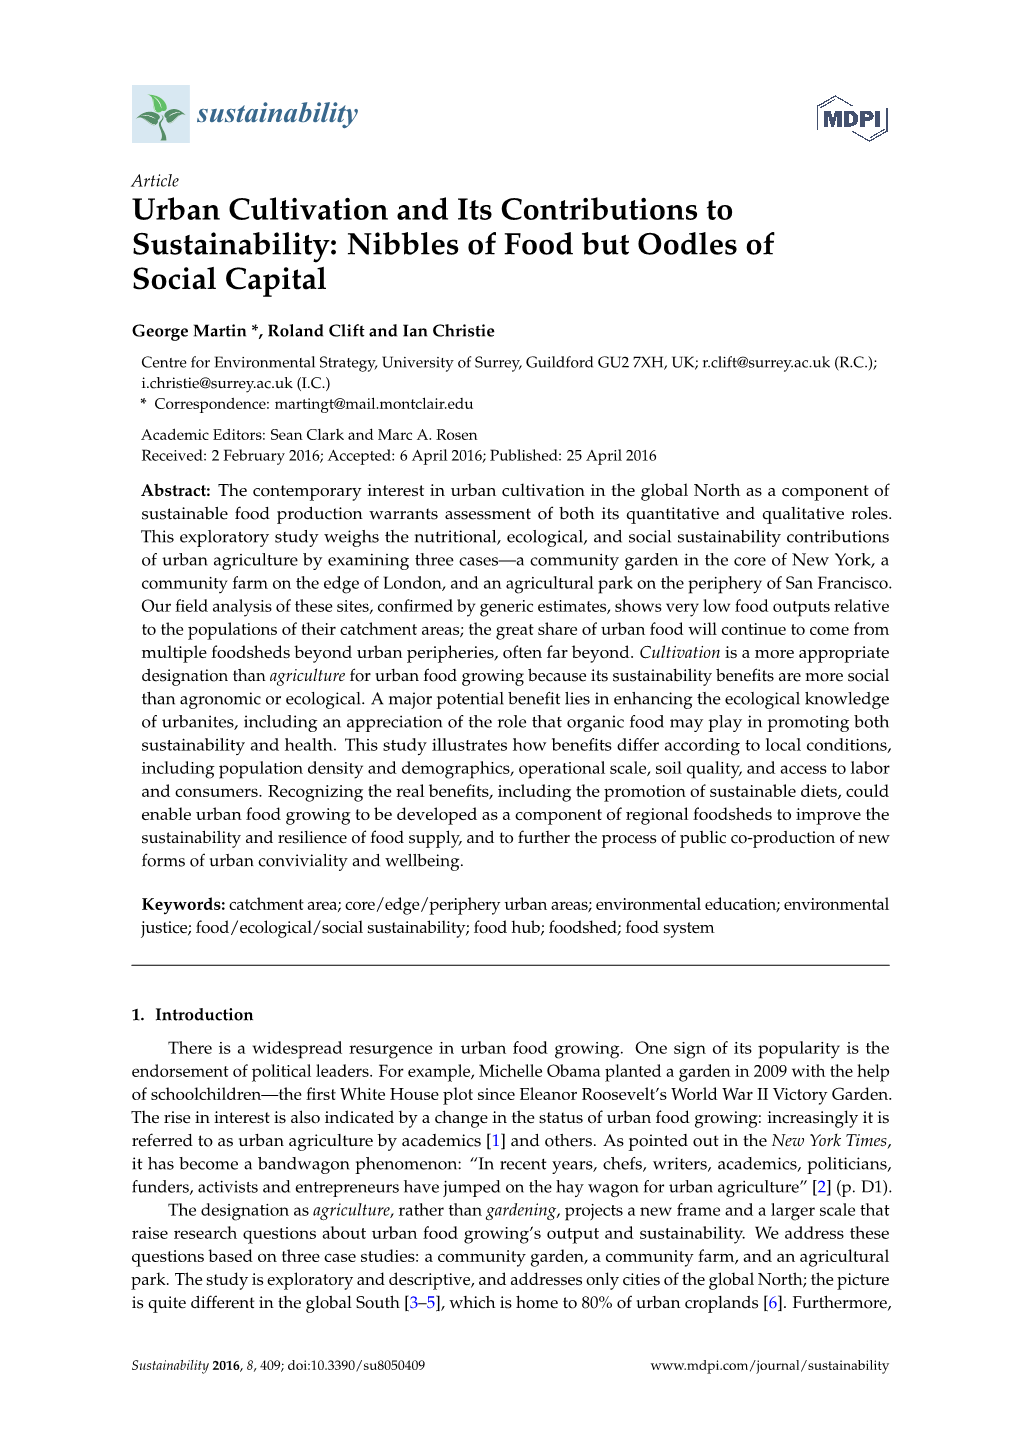 Urban Cultivation and Its Contributions to Sustainability: Nibbles of Food but Oodles of Social Capital